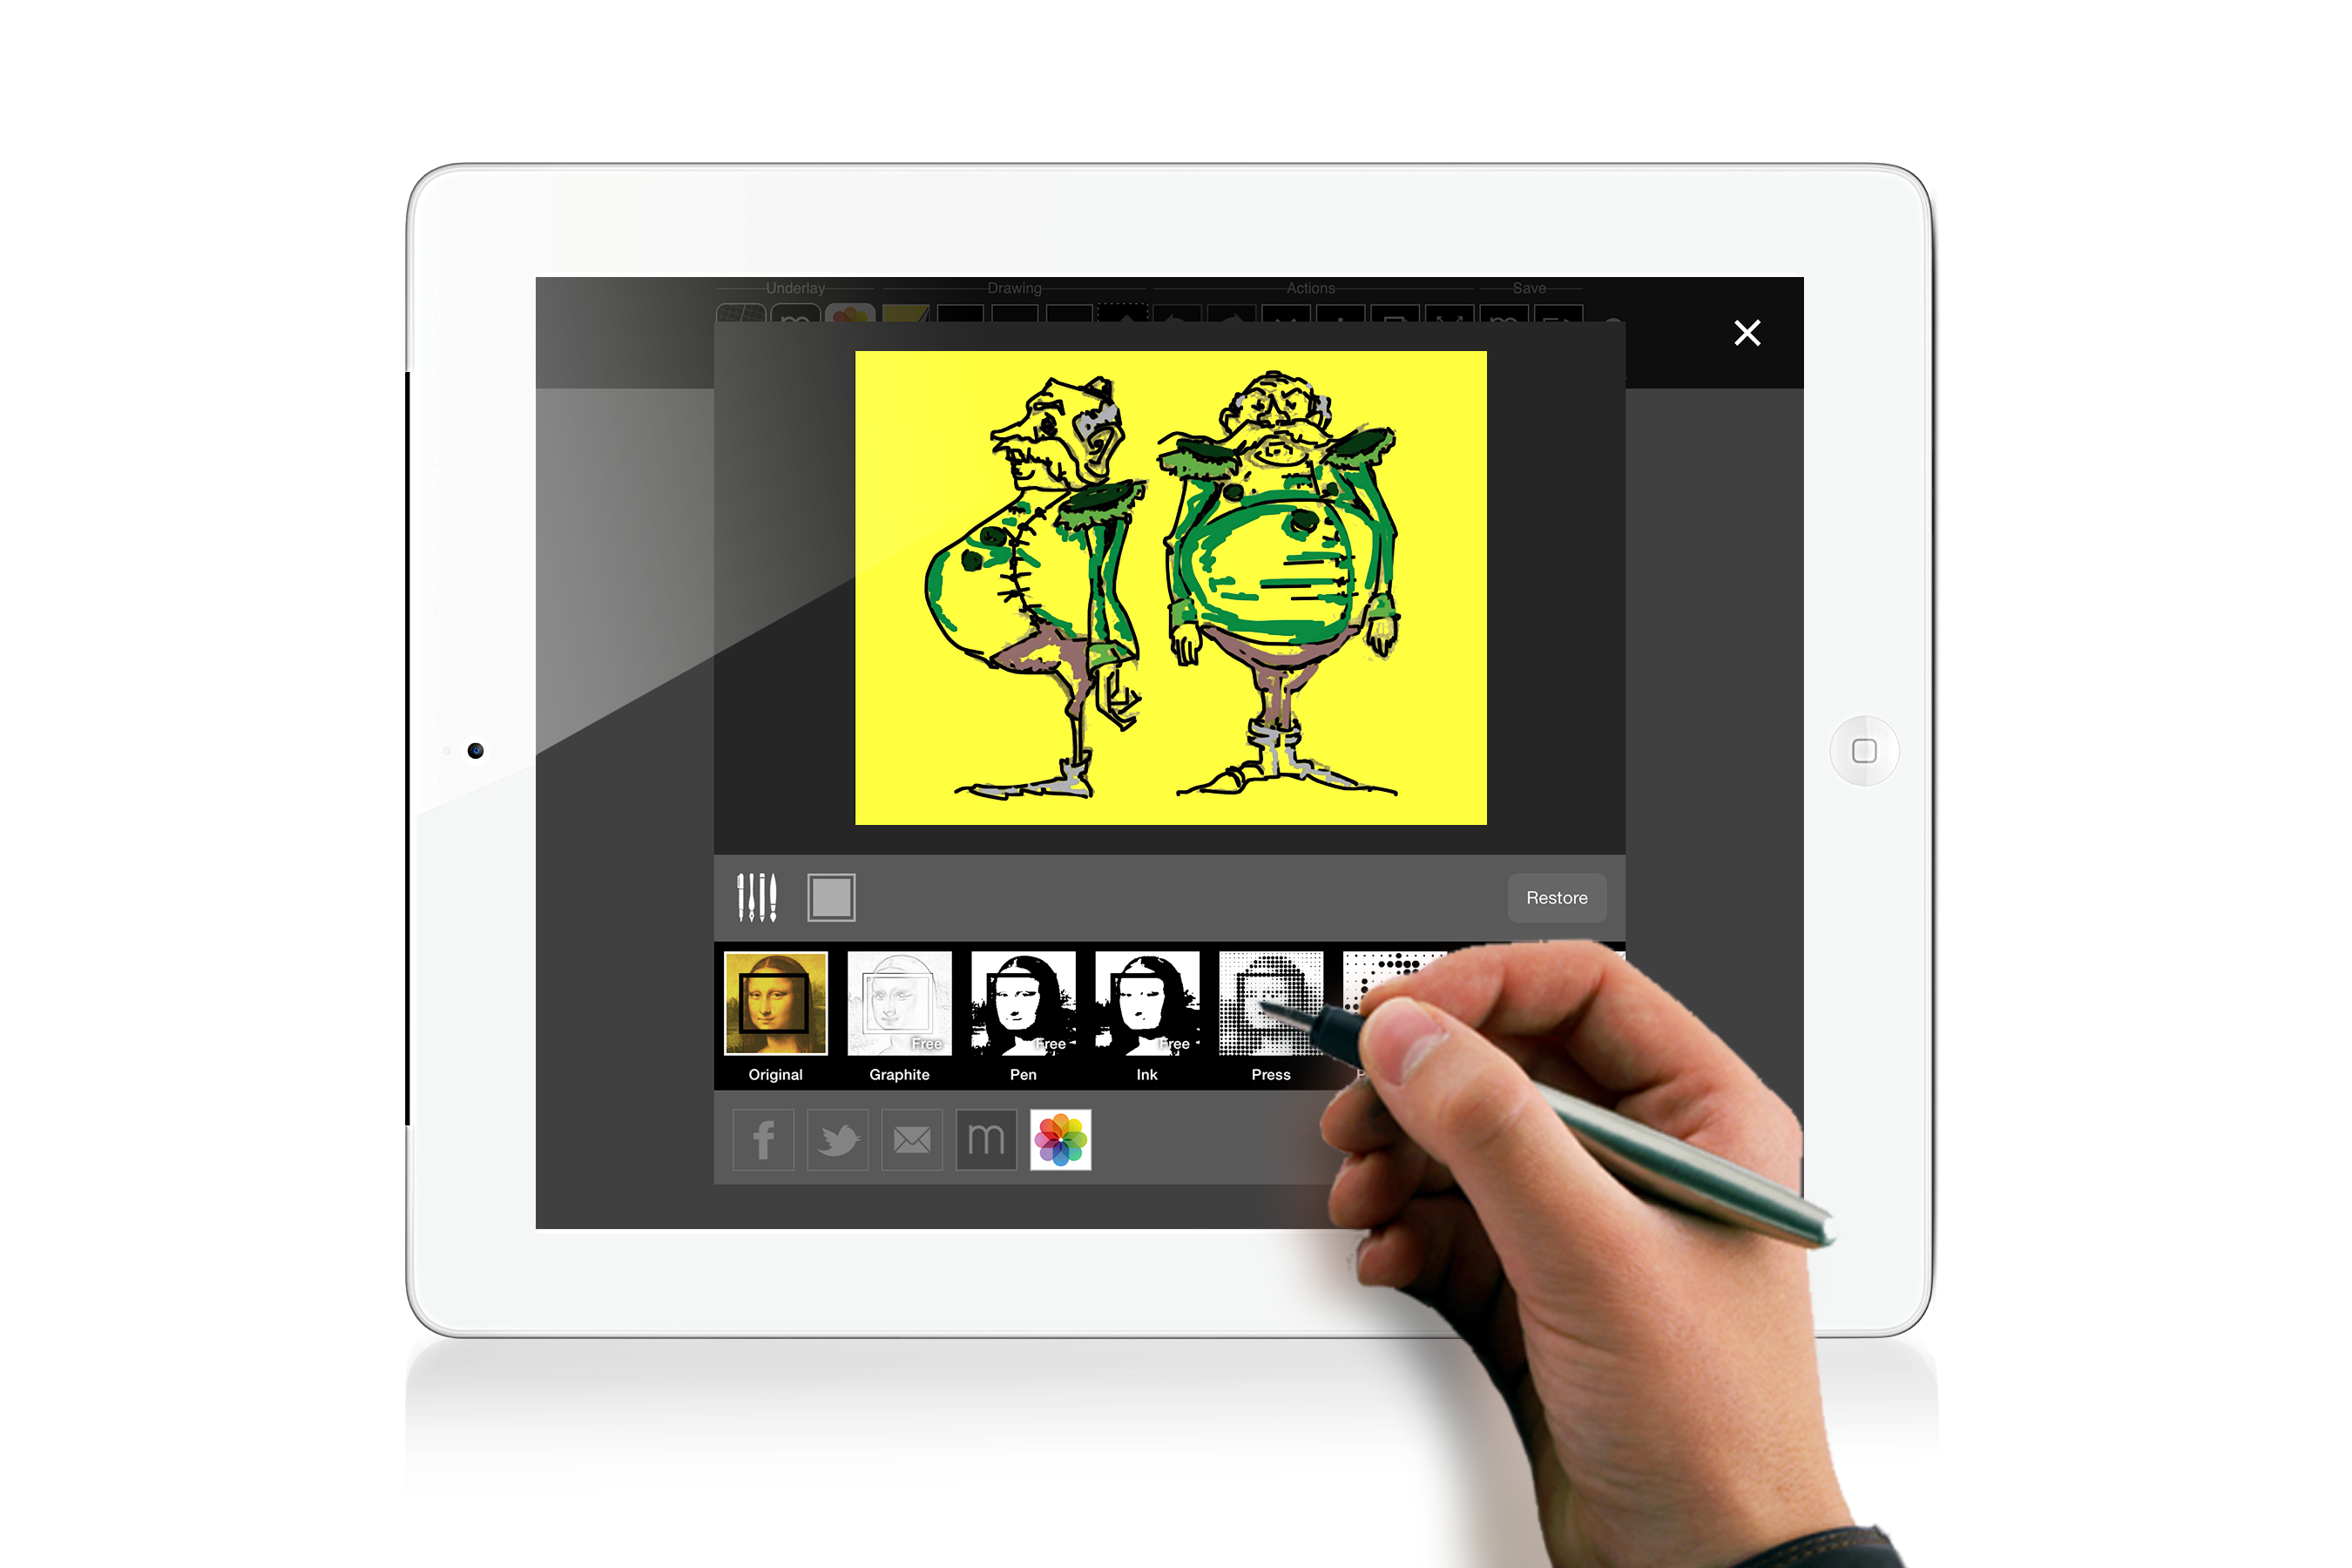 Top Drawing Apps For Android In 2021 - Make Tech Easier